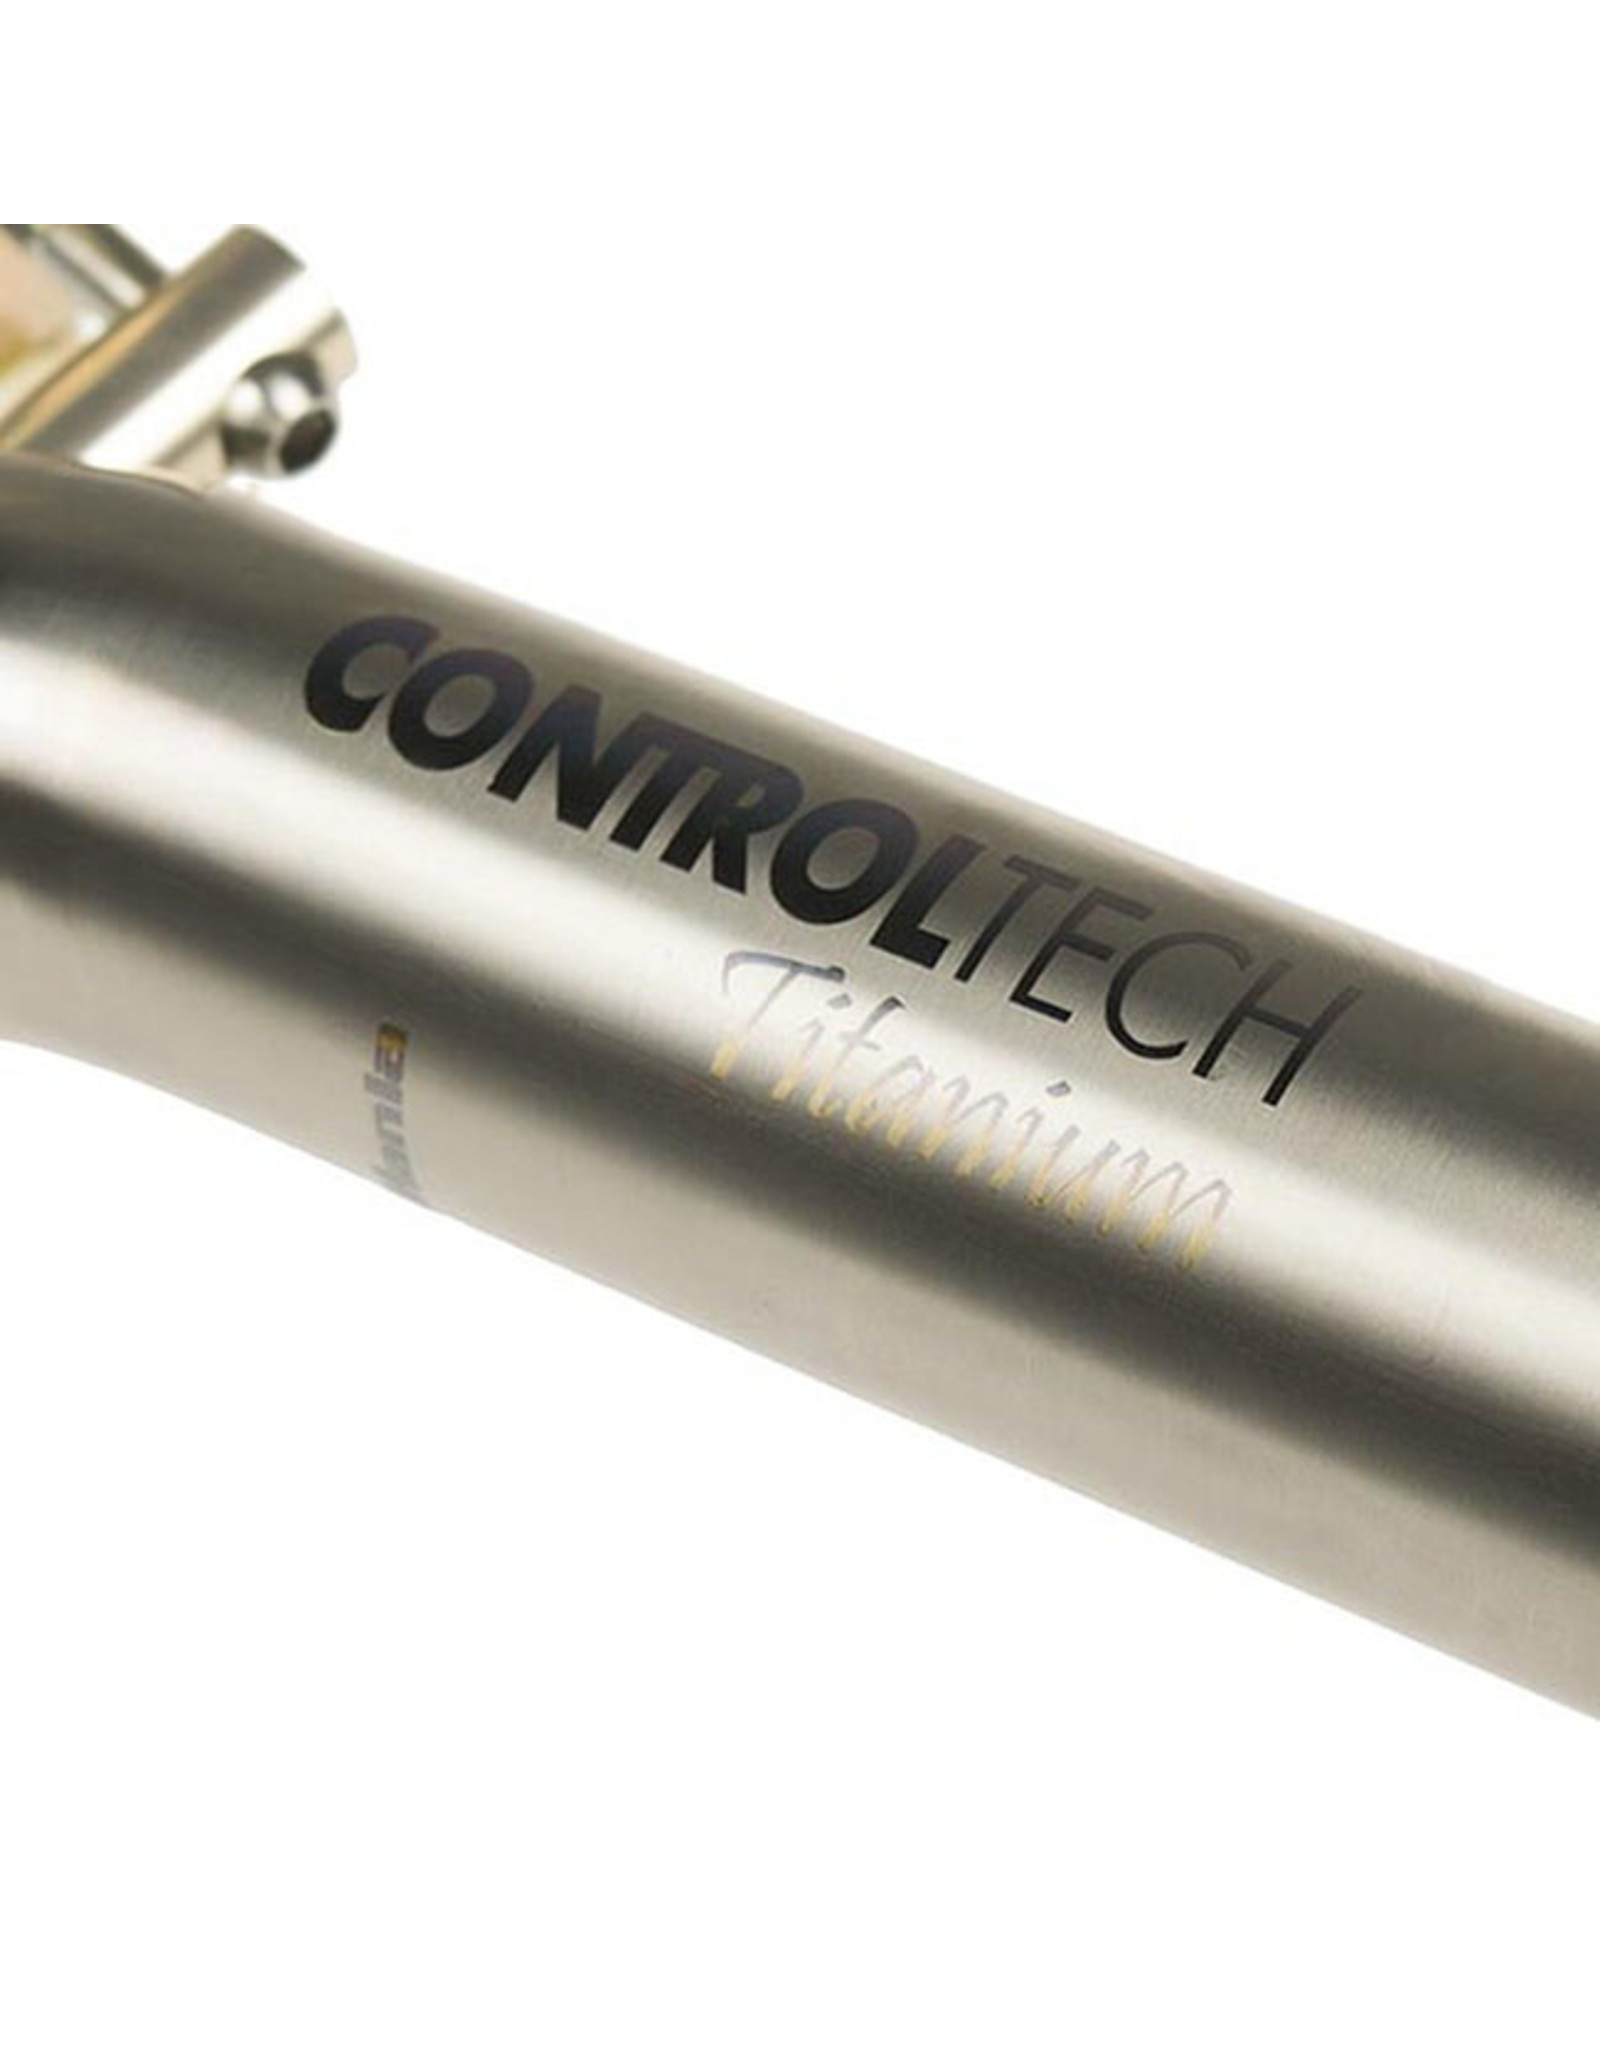 ControlTech ControlTech TiMania Offset Seatpost